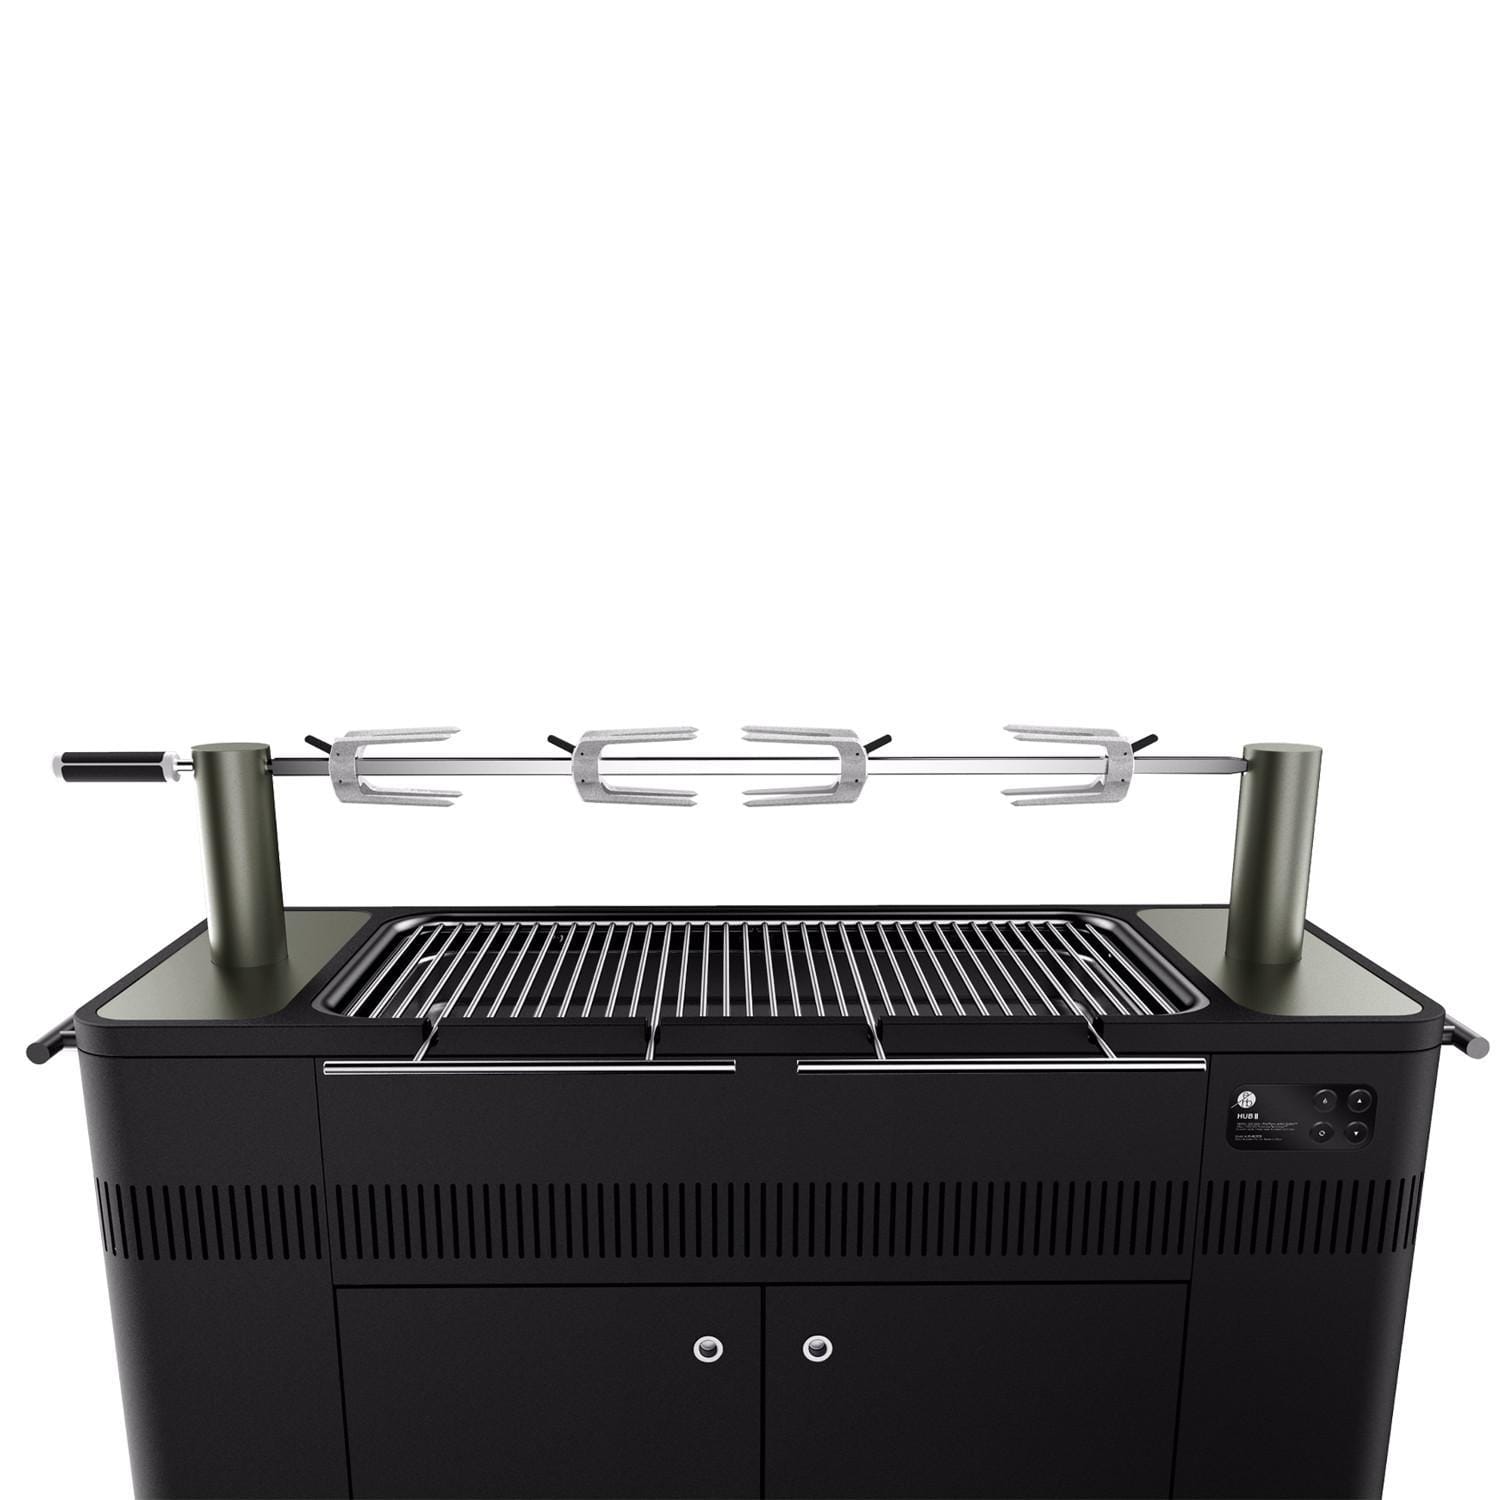 Everdure Charcoal Grill Everdure By Heston Blumenthal HUB II 54-Inch Charcoal Grill With Rotisserie & Electronic Ignition